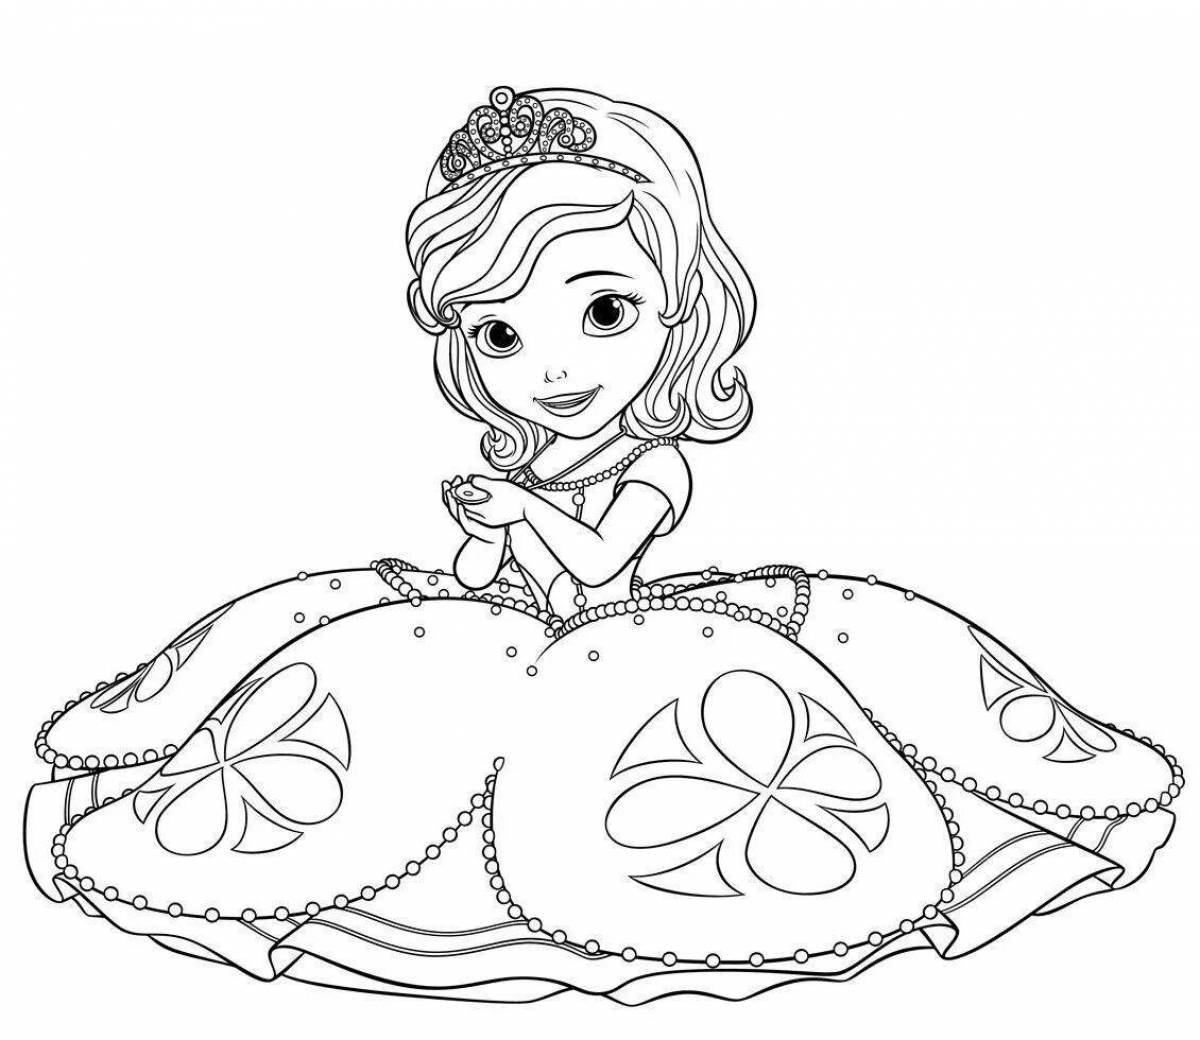 Sparkly princess coloring pages for girls 4-5 years old